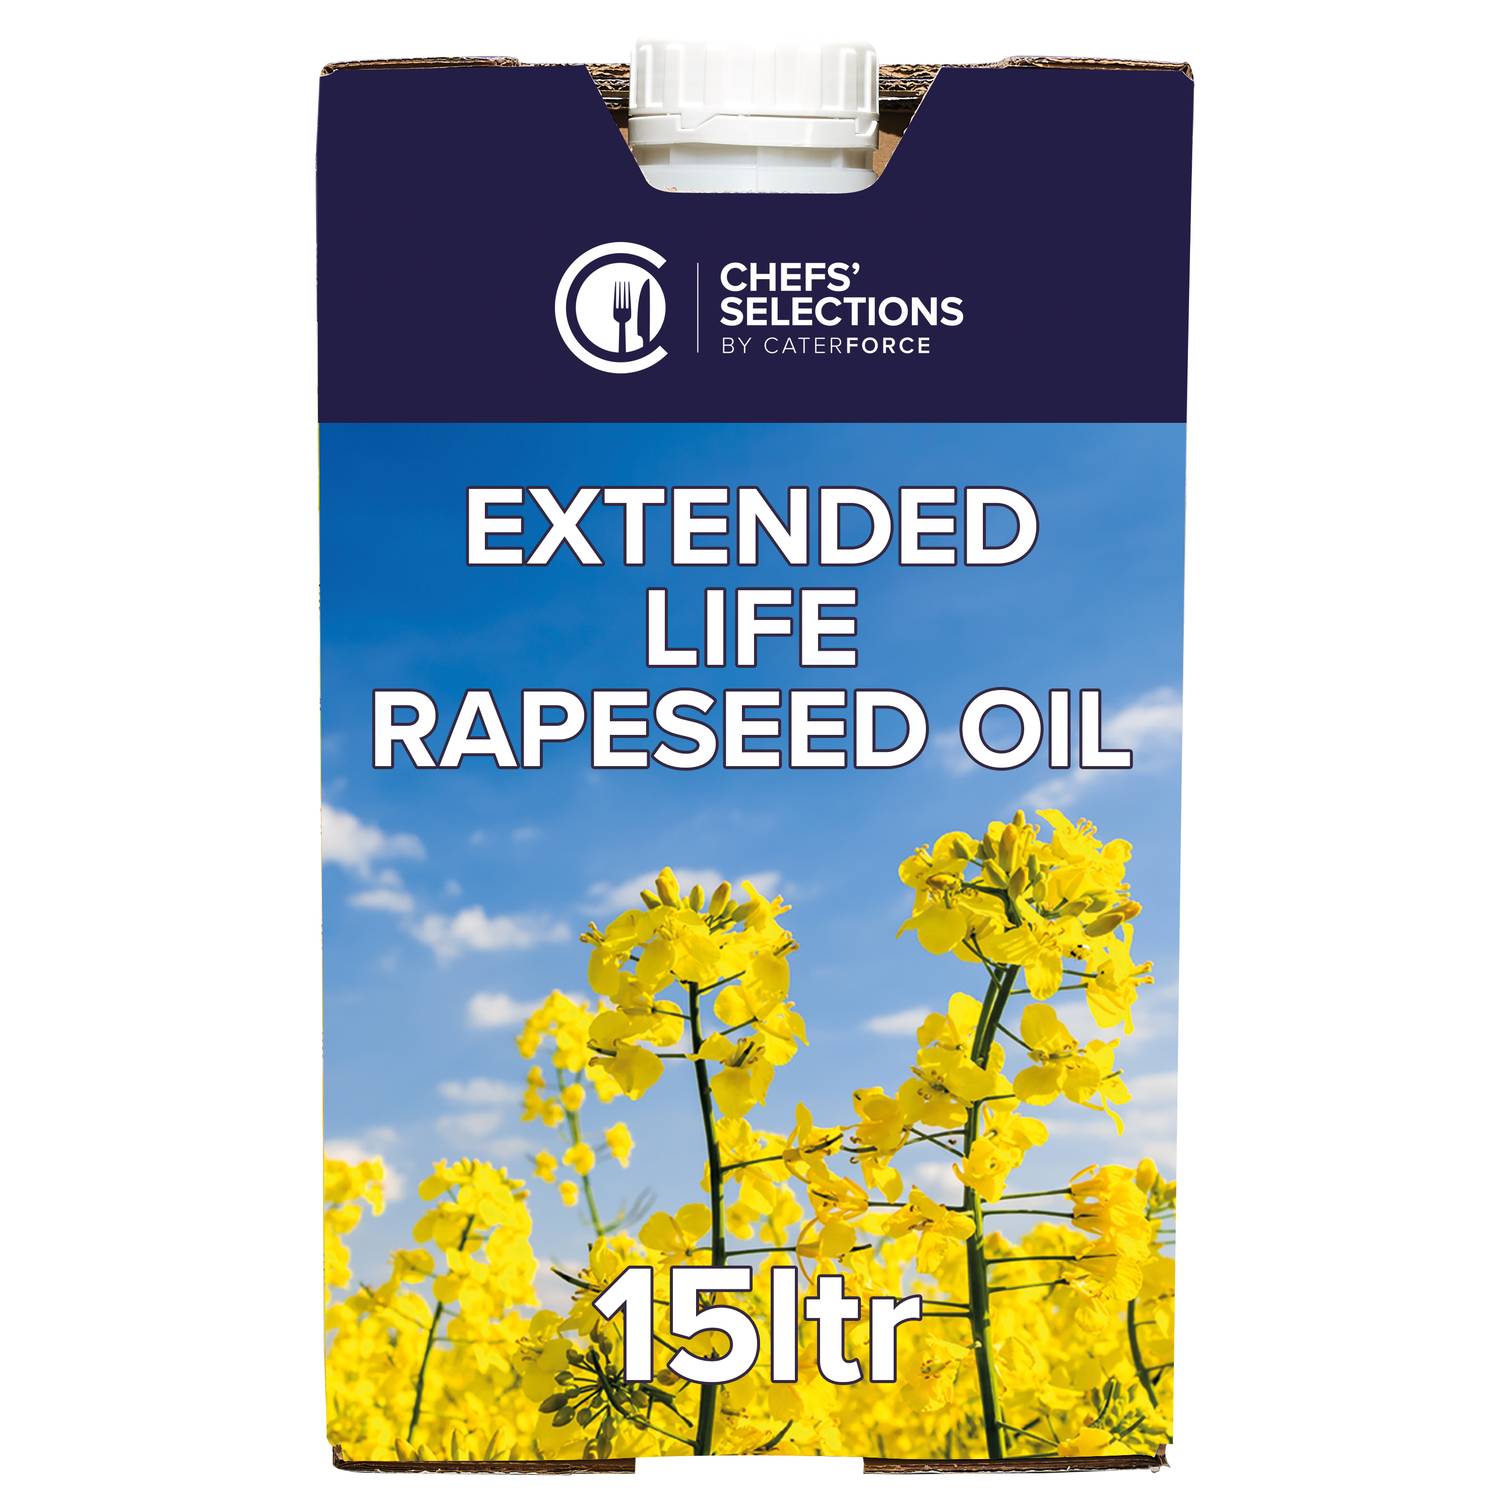 Chefs’ Selections Extended Life Rapeseed Oil BiB (1 x 15L)